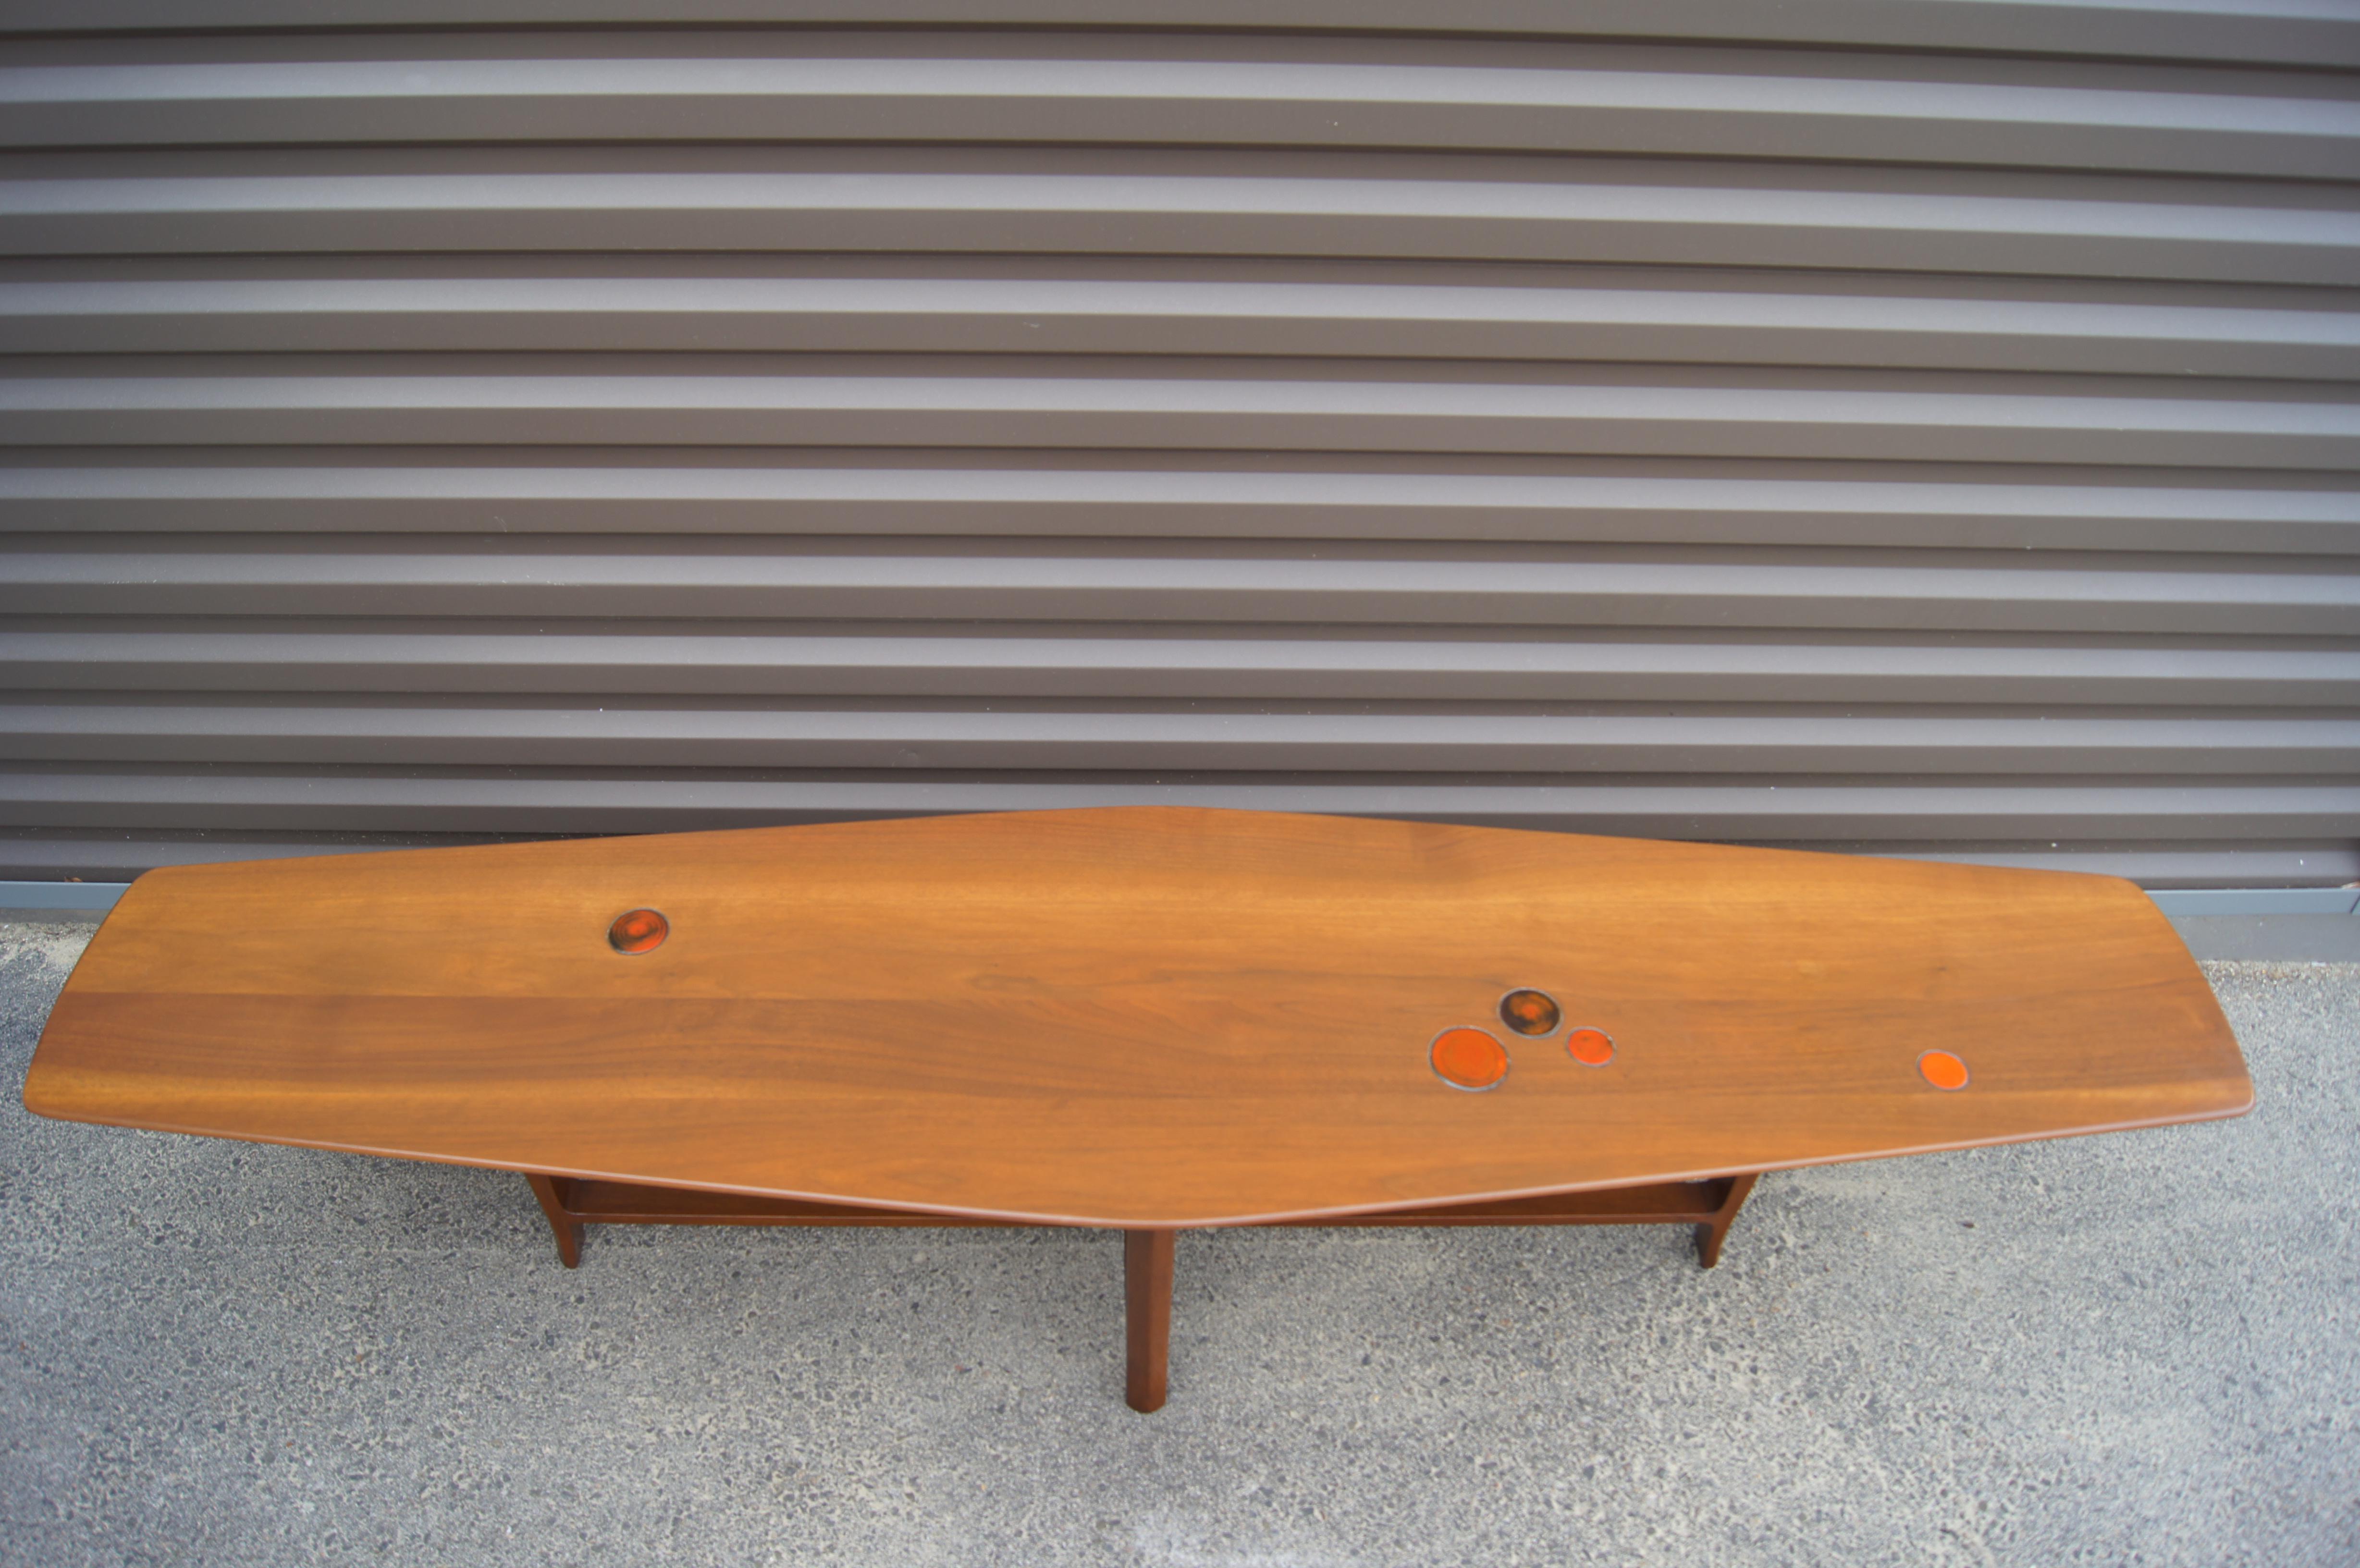 Edward Wormley designed this fabulous walnut coffee table, model 5632N, for Dunbar circa 1957. The long, angular top is inset with orange and black ceramic tiles by Gertrud and Otto Natzler and floats over a cross-frame base with a darker,